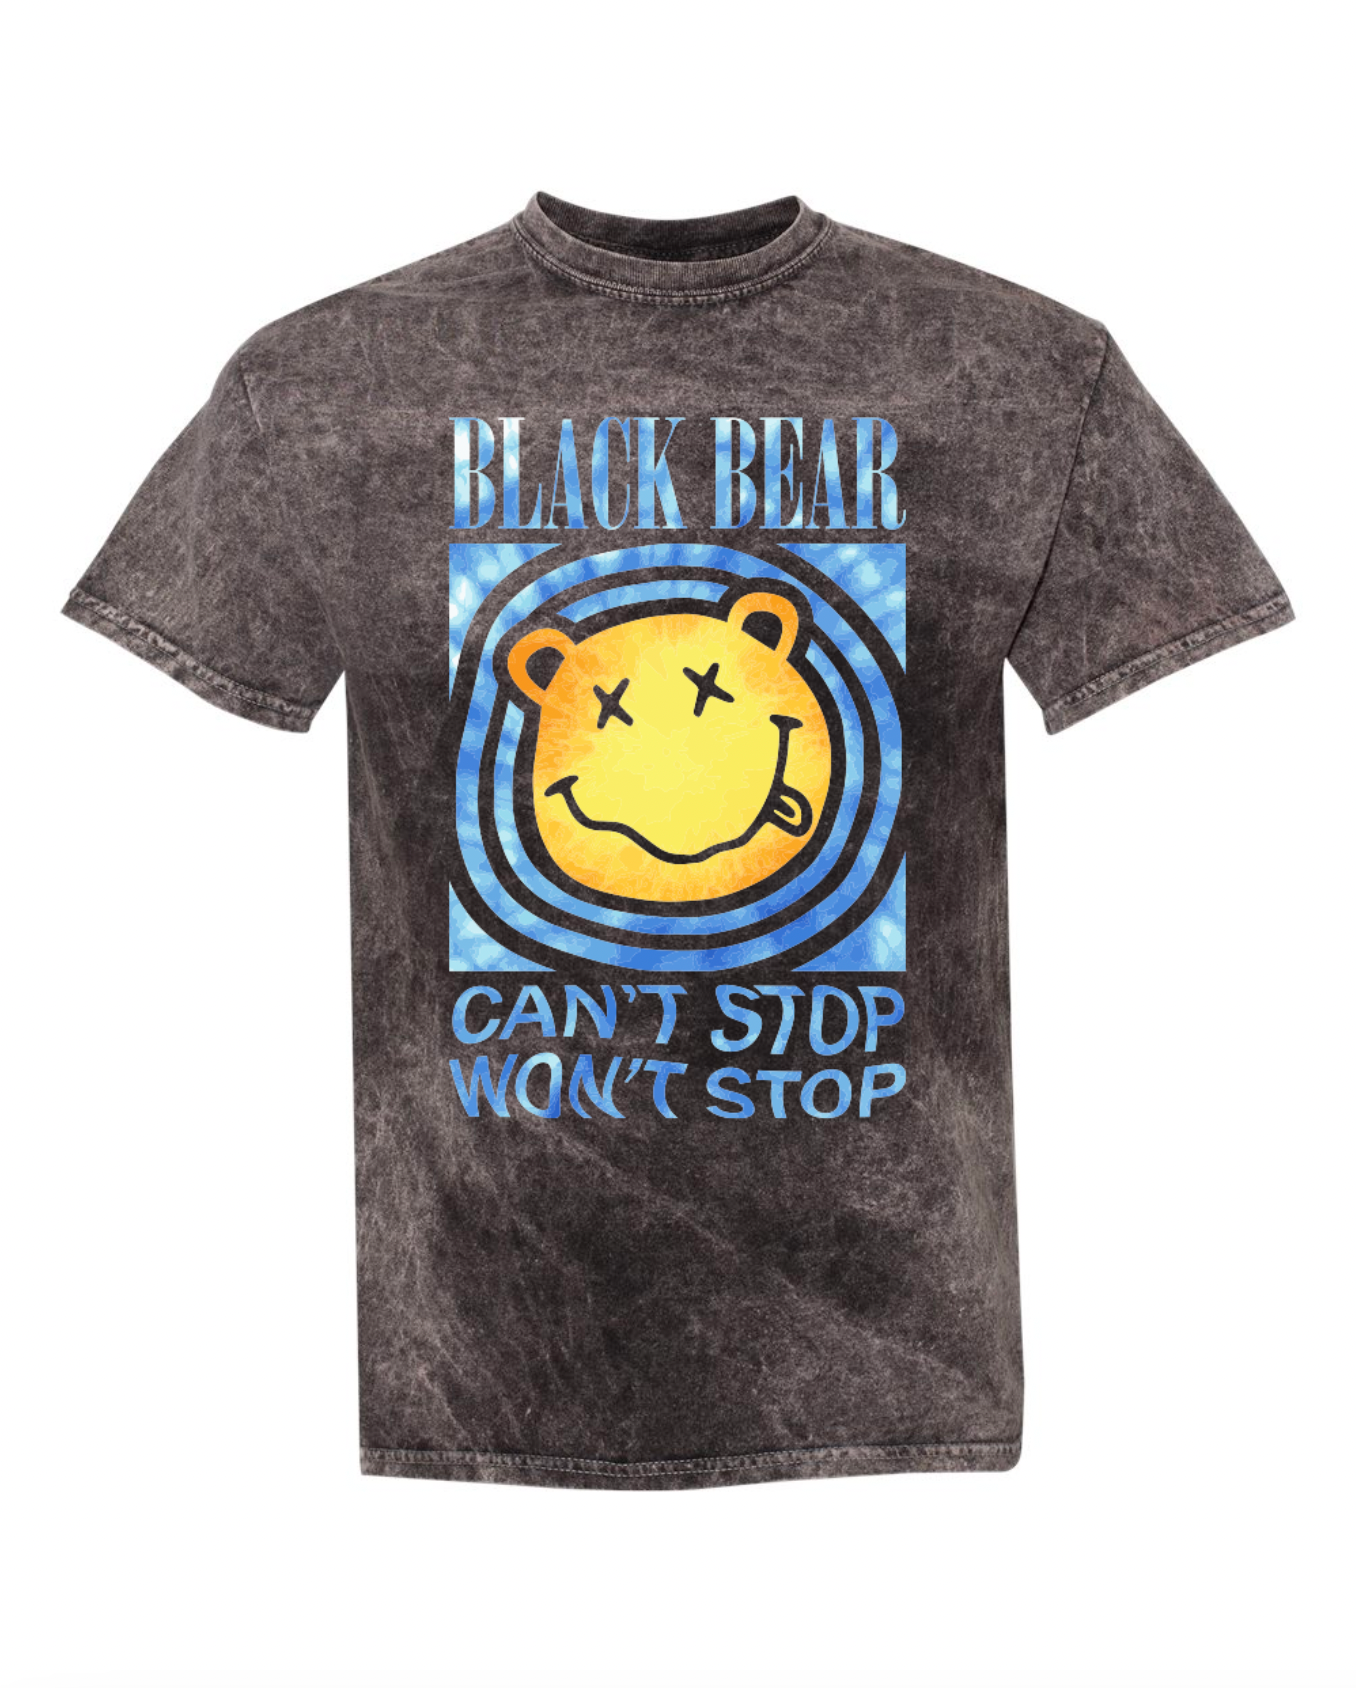 Black Bear Athletics Tie Dye Band Tee Can't Stop Won't Stop Mineral Wash T-Shirt 200MW